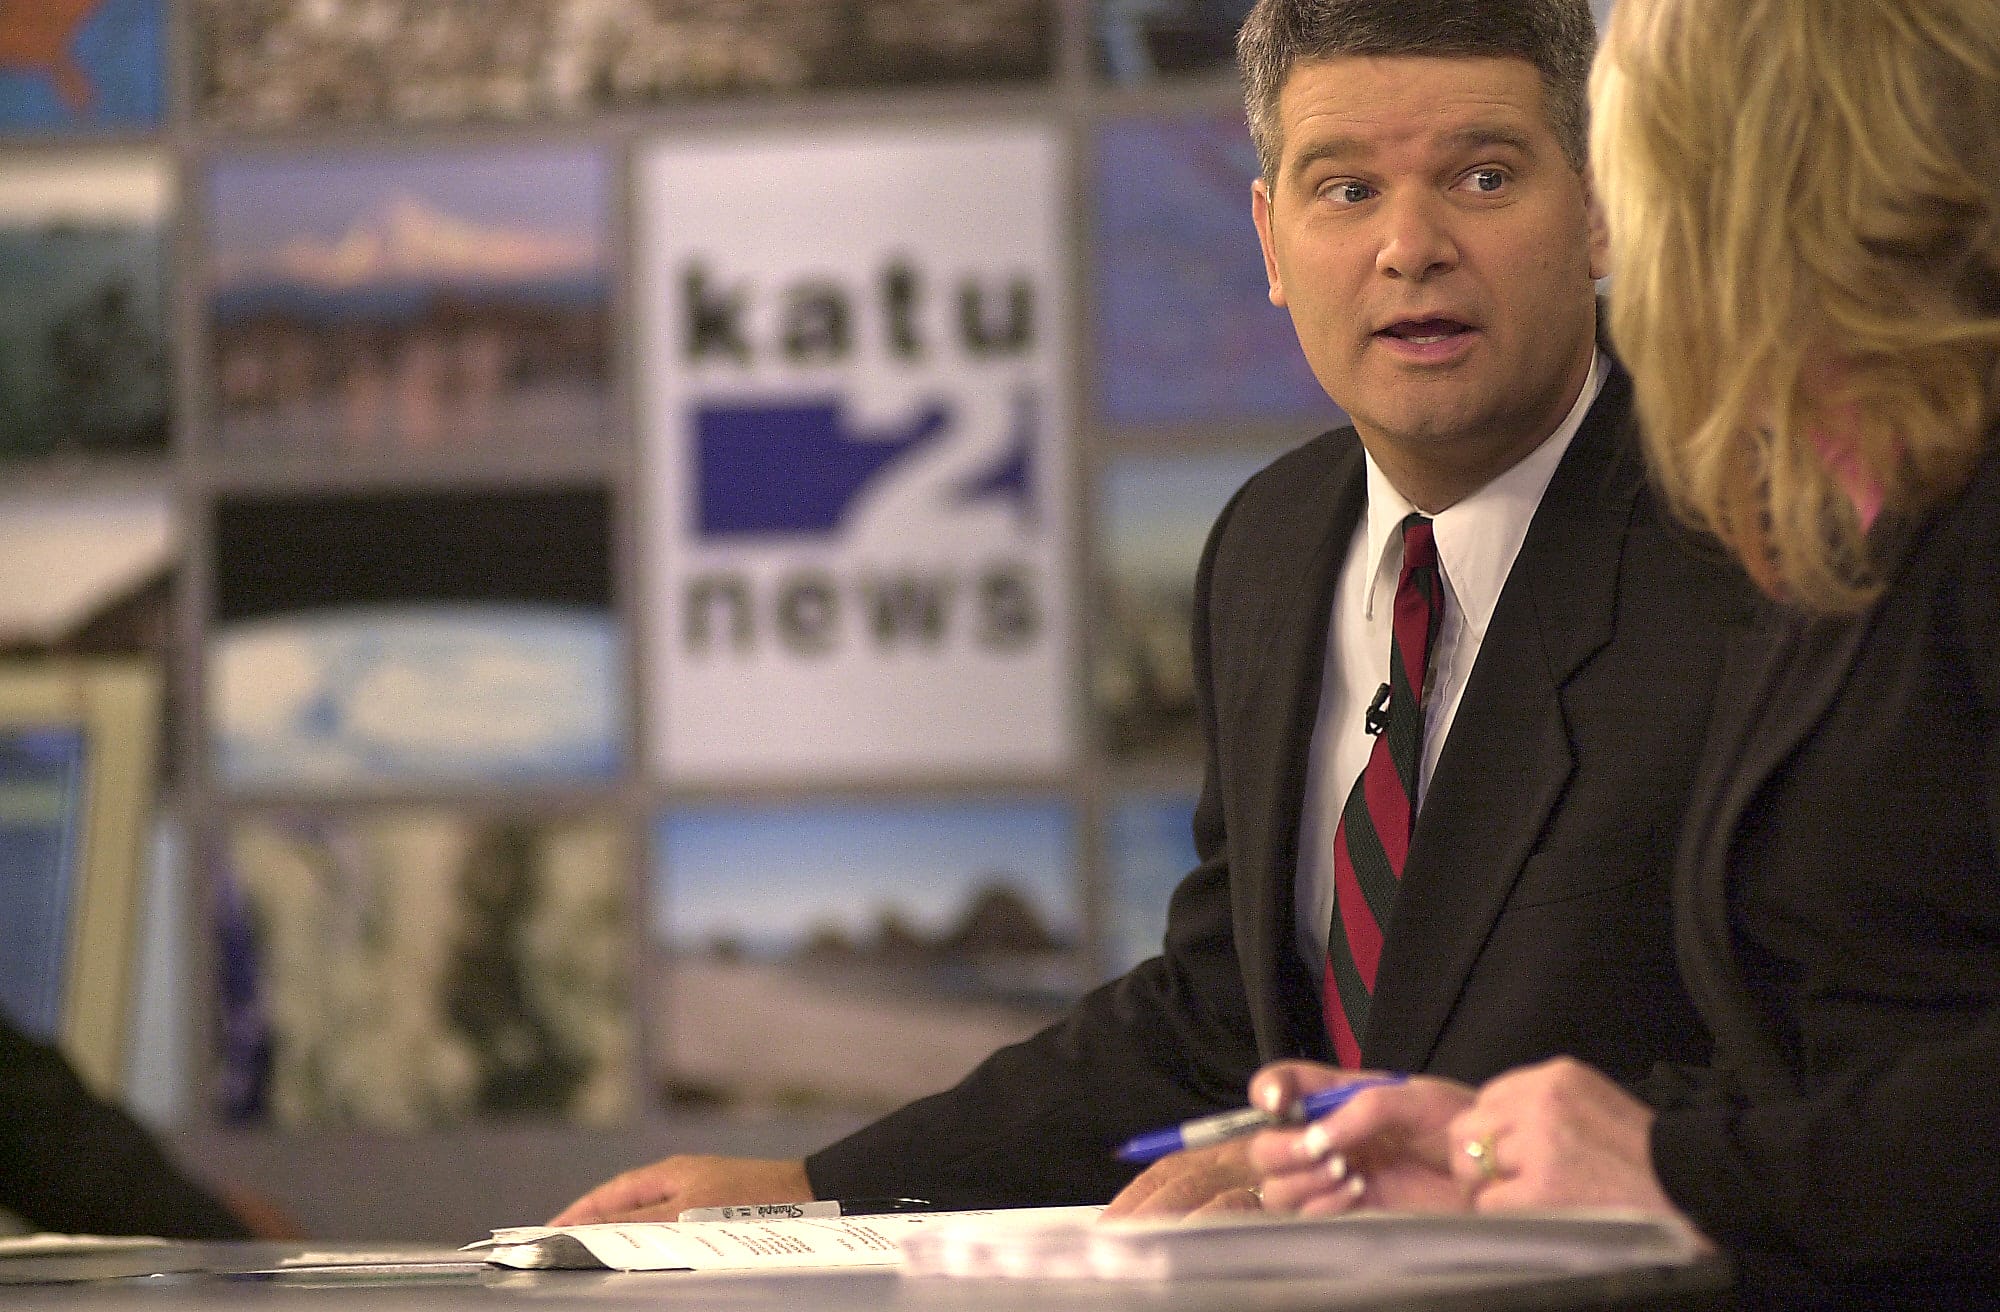 Carl Click reports the early-morning news with co-anchor Helen Raptis on first day on the job at KATU.